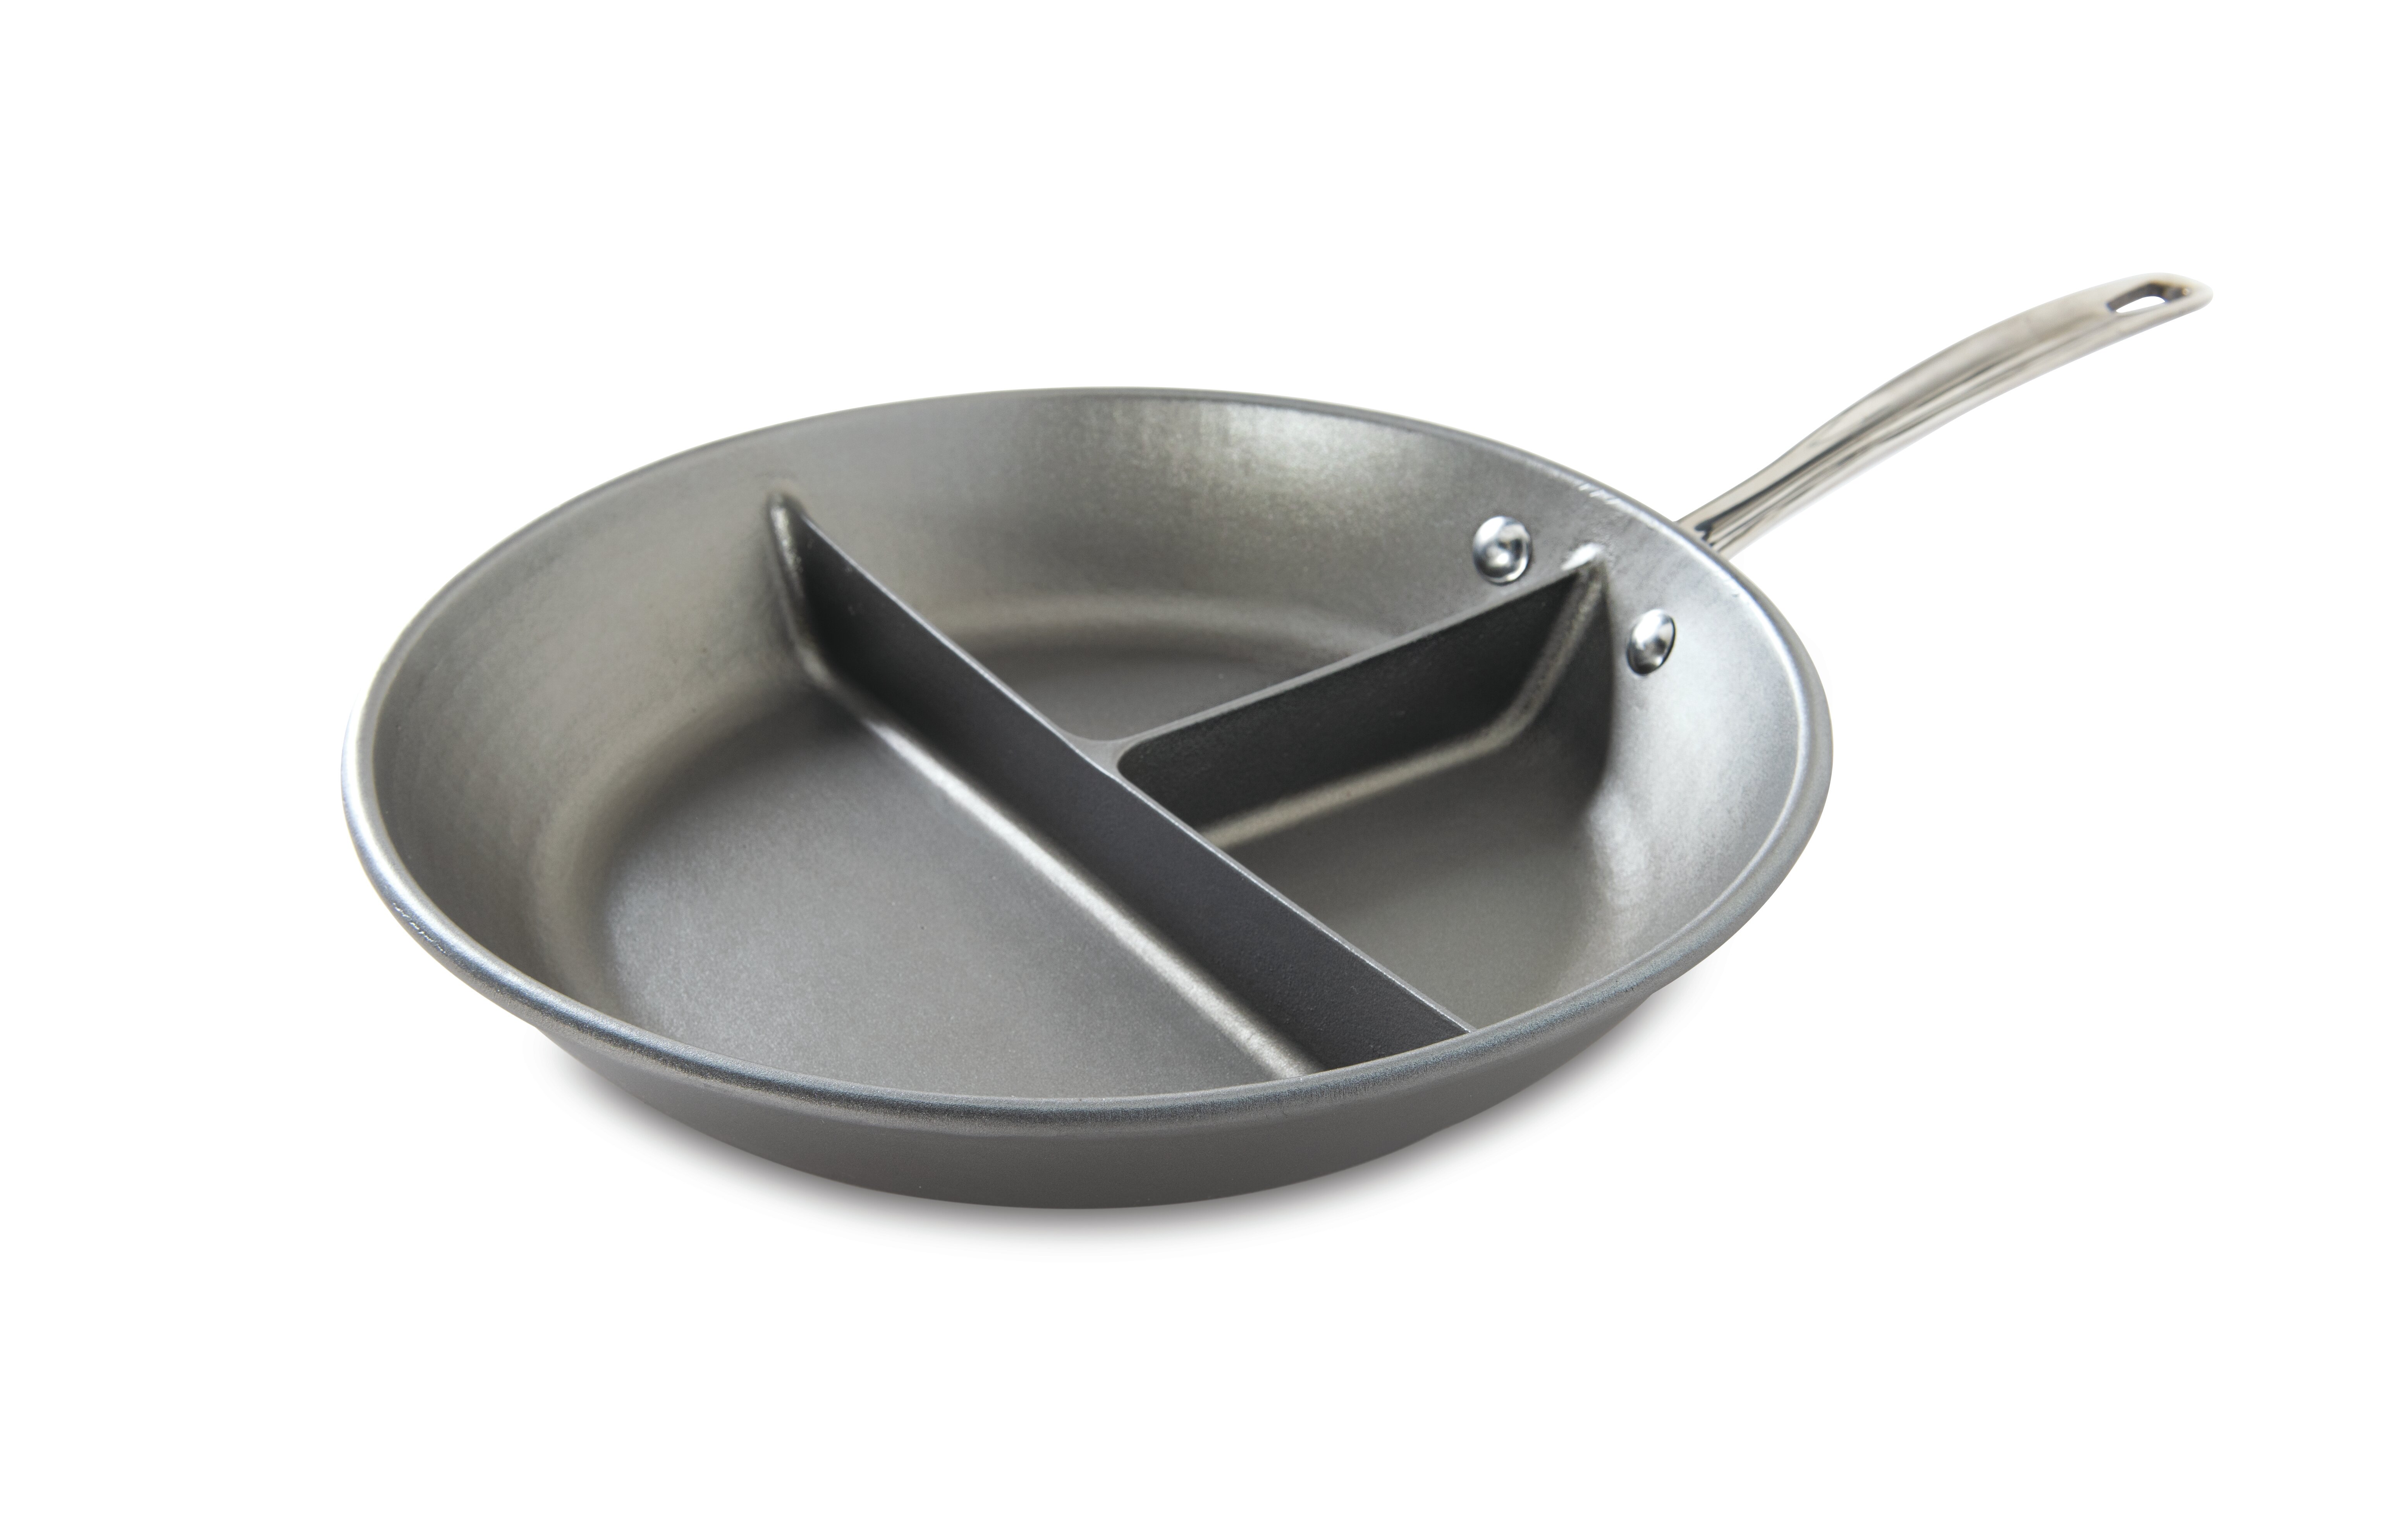  Nordic Ware Divided Sauce Pan, 2-in-1, Silver: Home